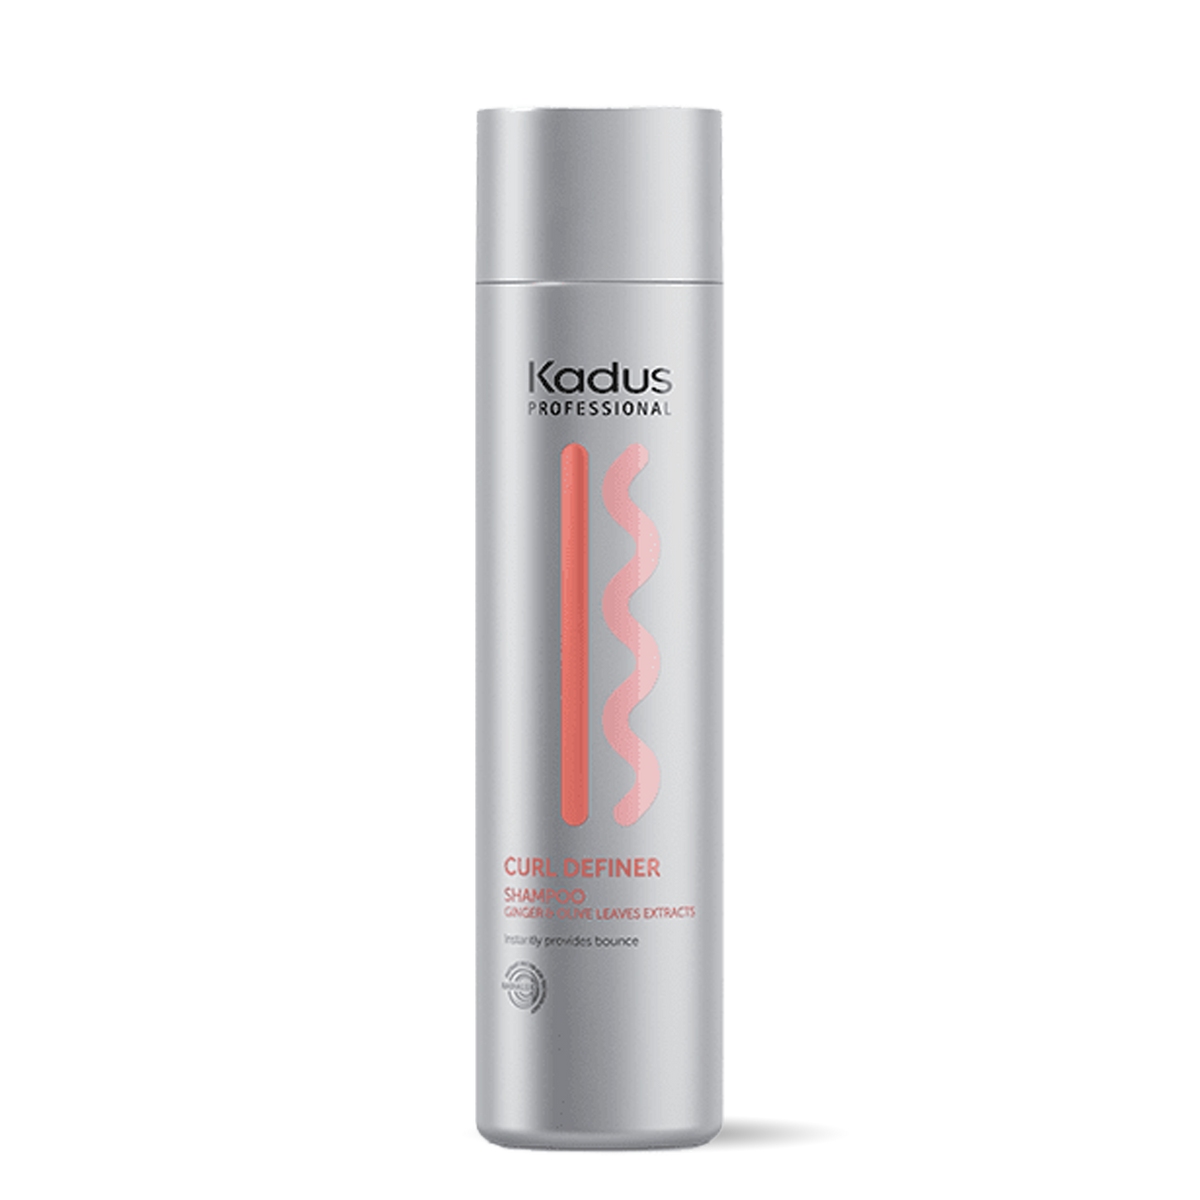 Kadus Curl Definer Shampoo 250ml - by Kadus Professionals |ProCare Outlet|